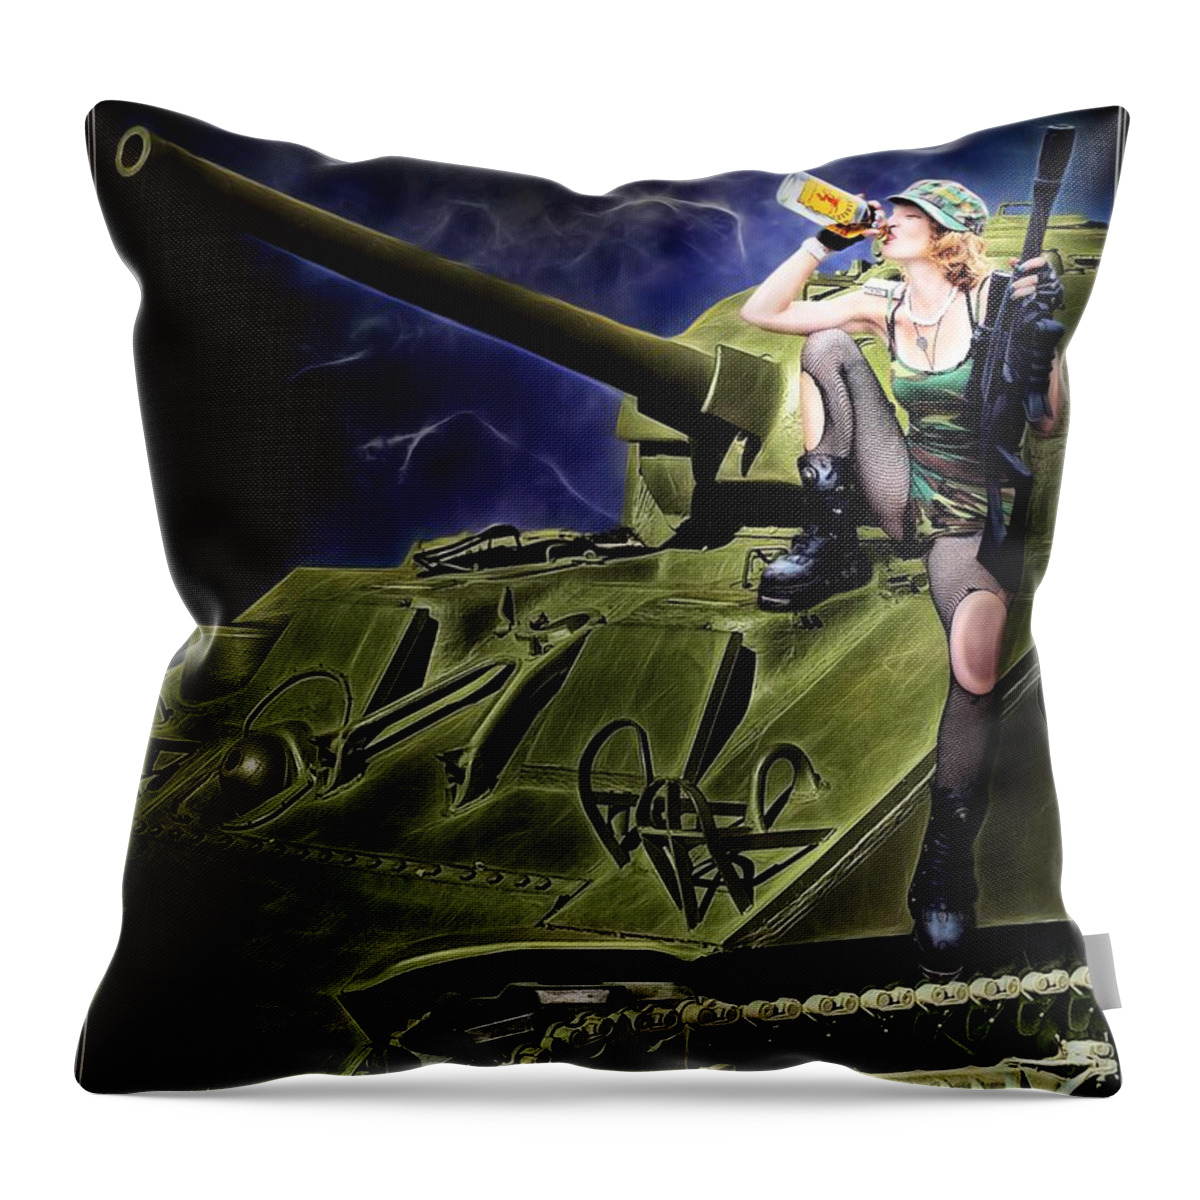 Fantasy Throw Pillow featuring the photograph Bottoms Up by Jon Volden